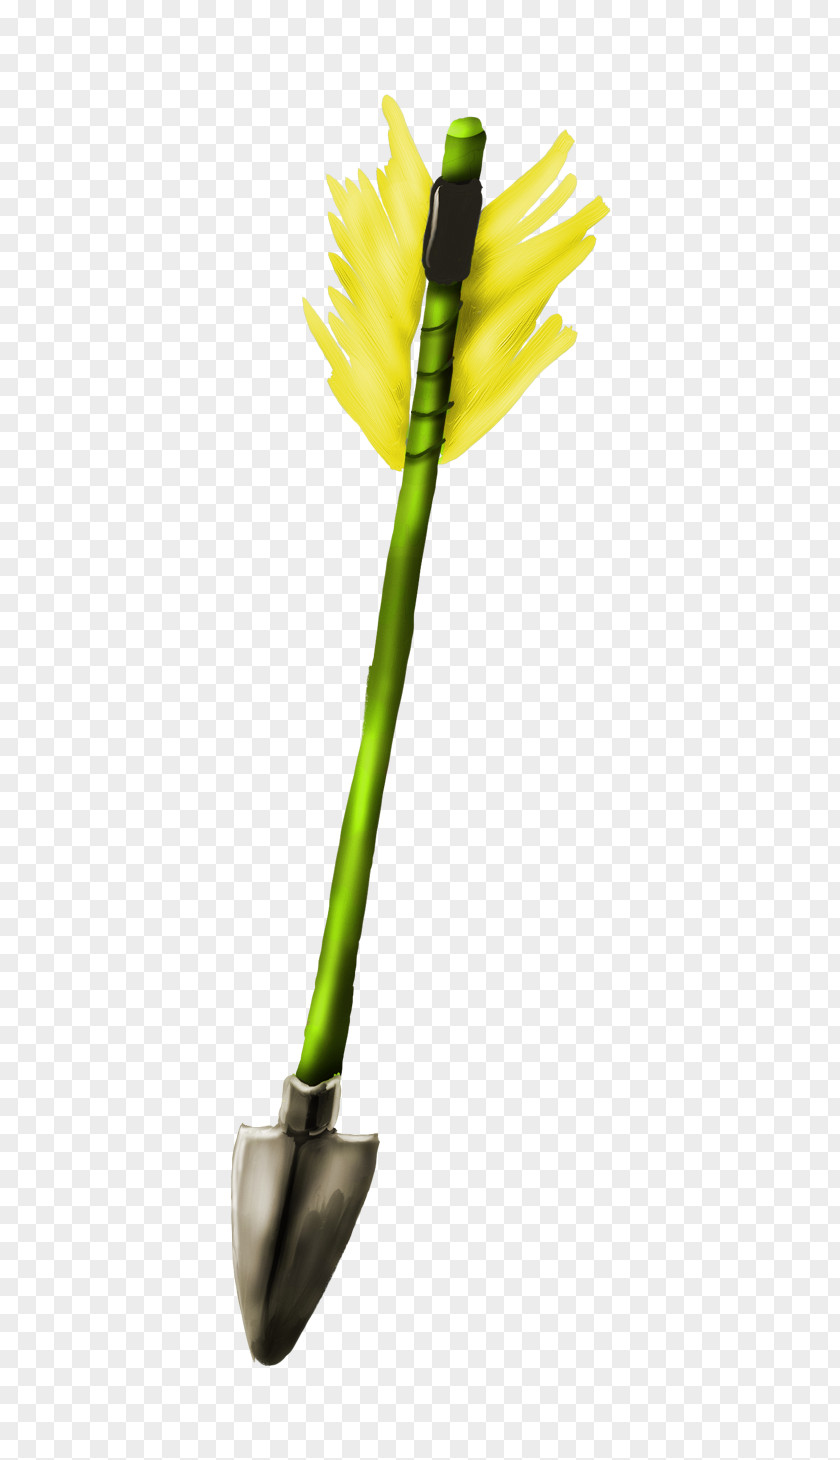 Yellow Feather Changjon Bow And Arrow PNG